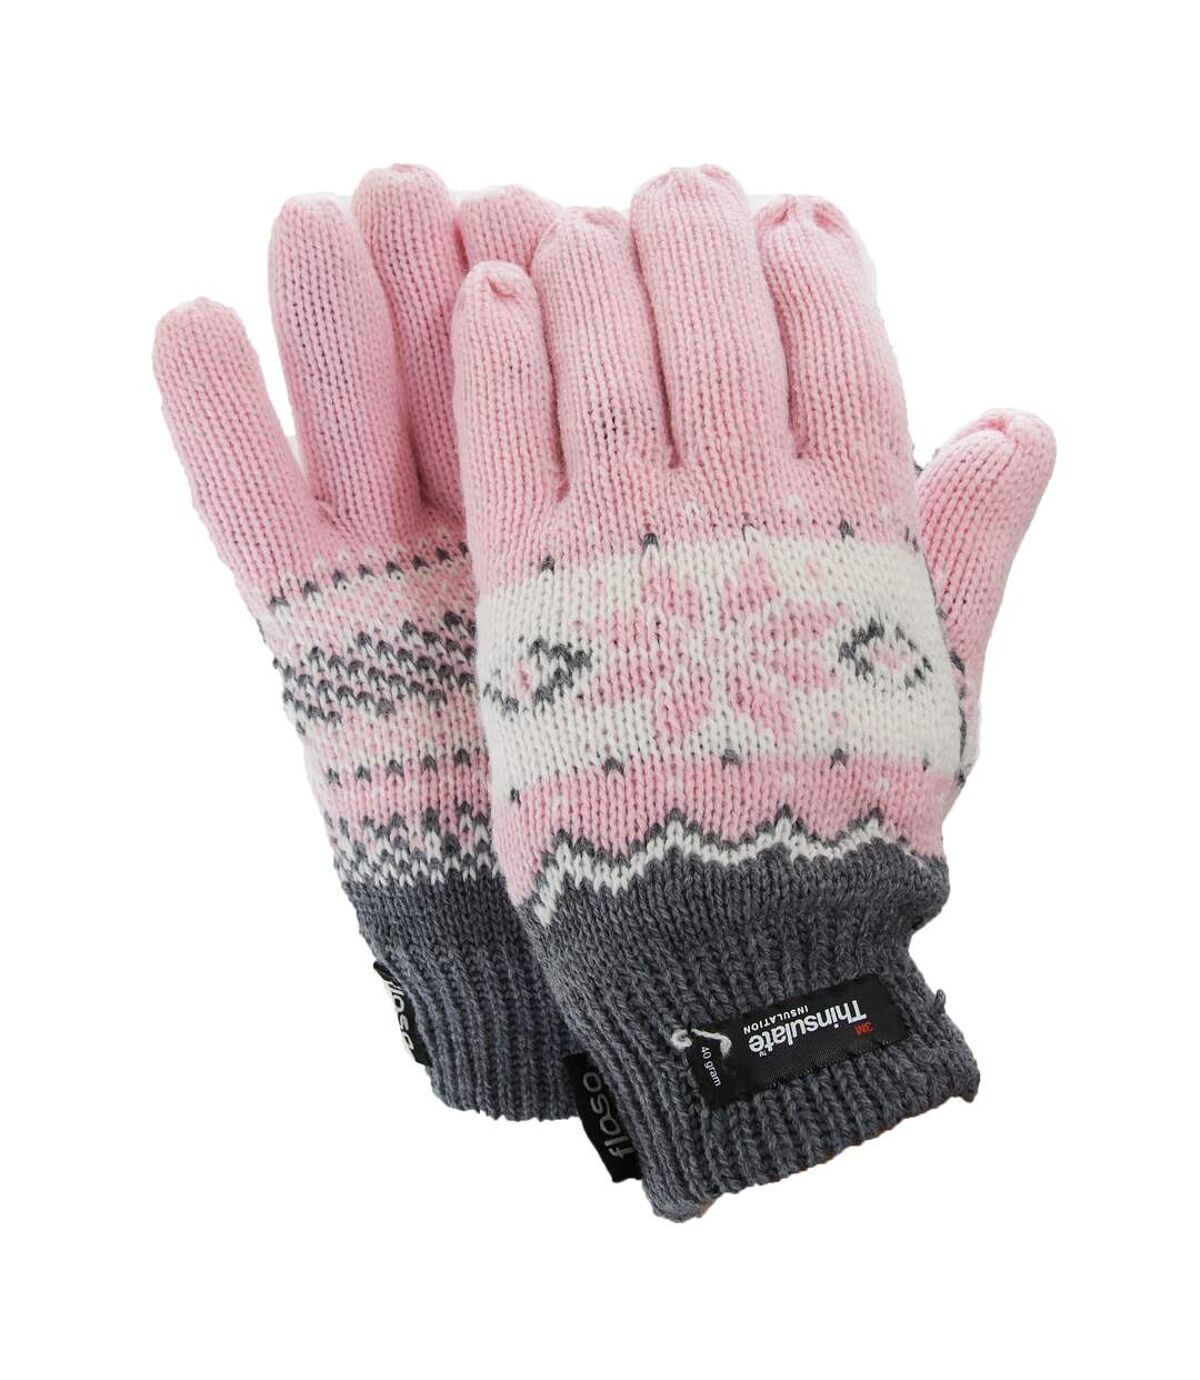 FLOSO - Gants thermiques Thinsulate (3M 40g) - Femme (Rose) - UTGL519